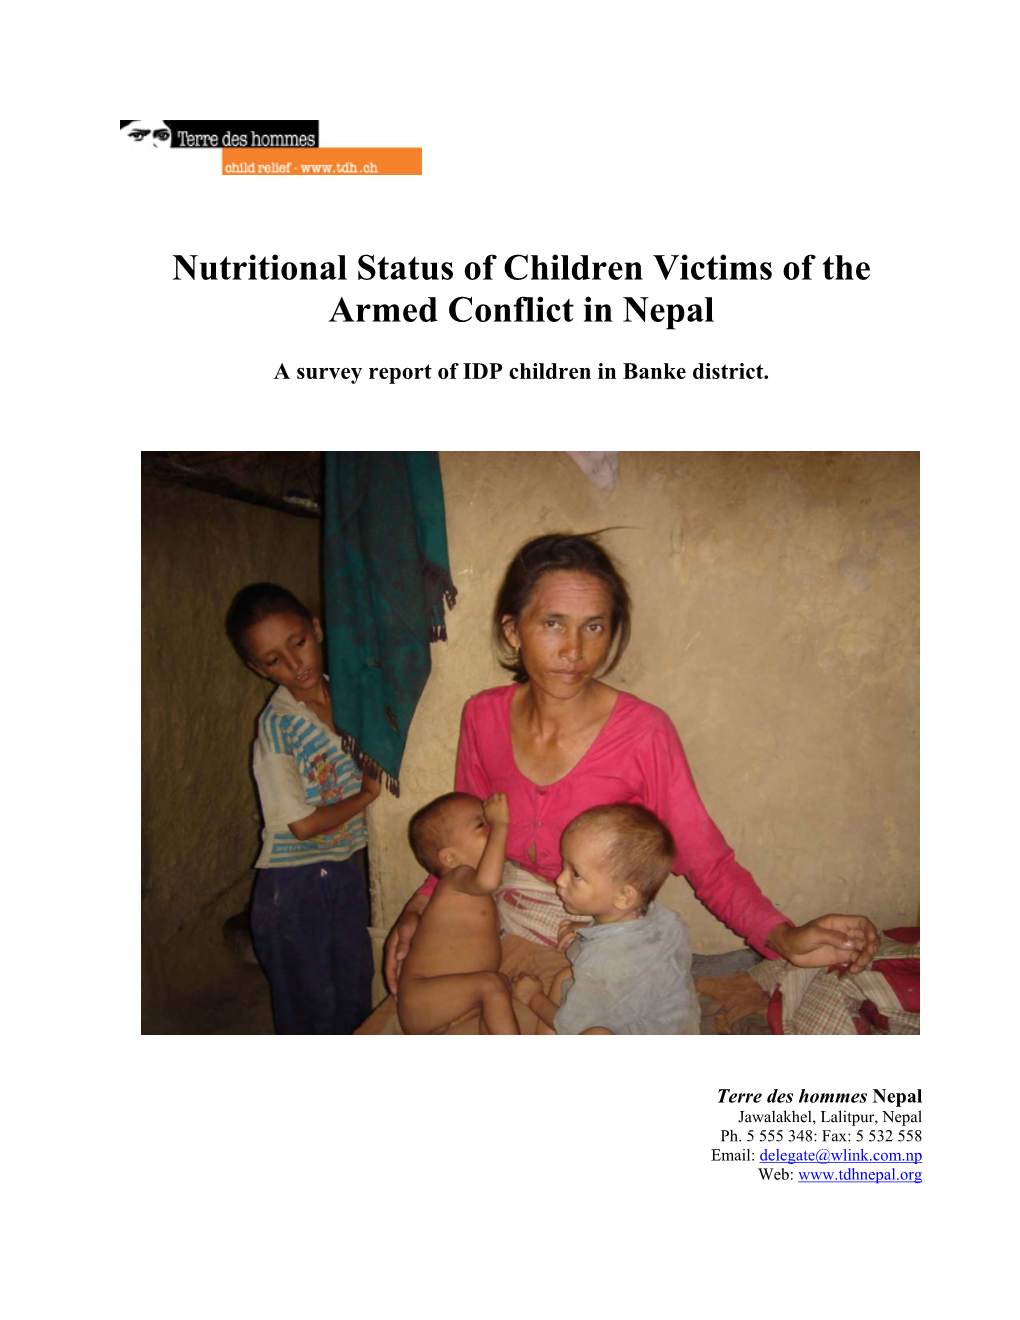 Nutritional Status of Children Victims of the Armed Conflict in Nepal